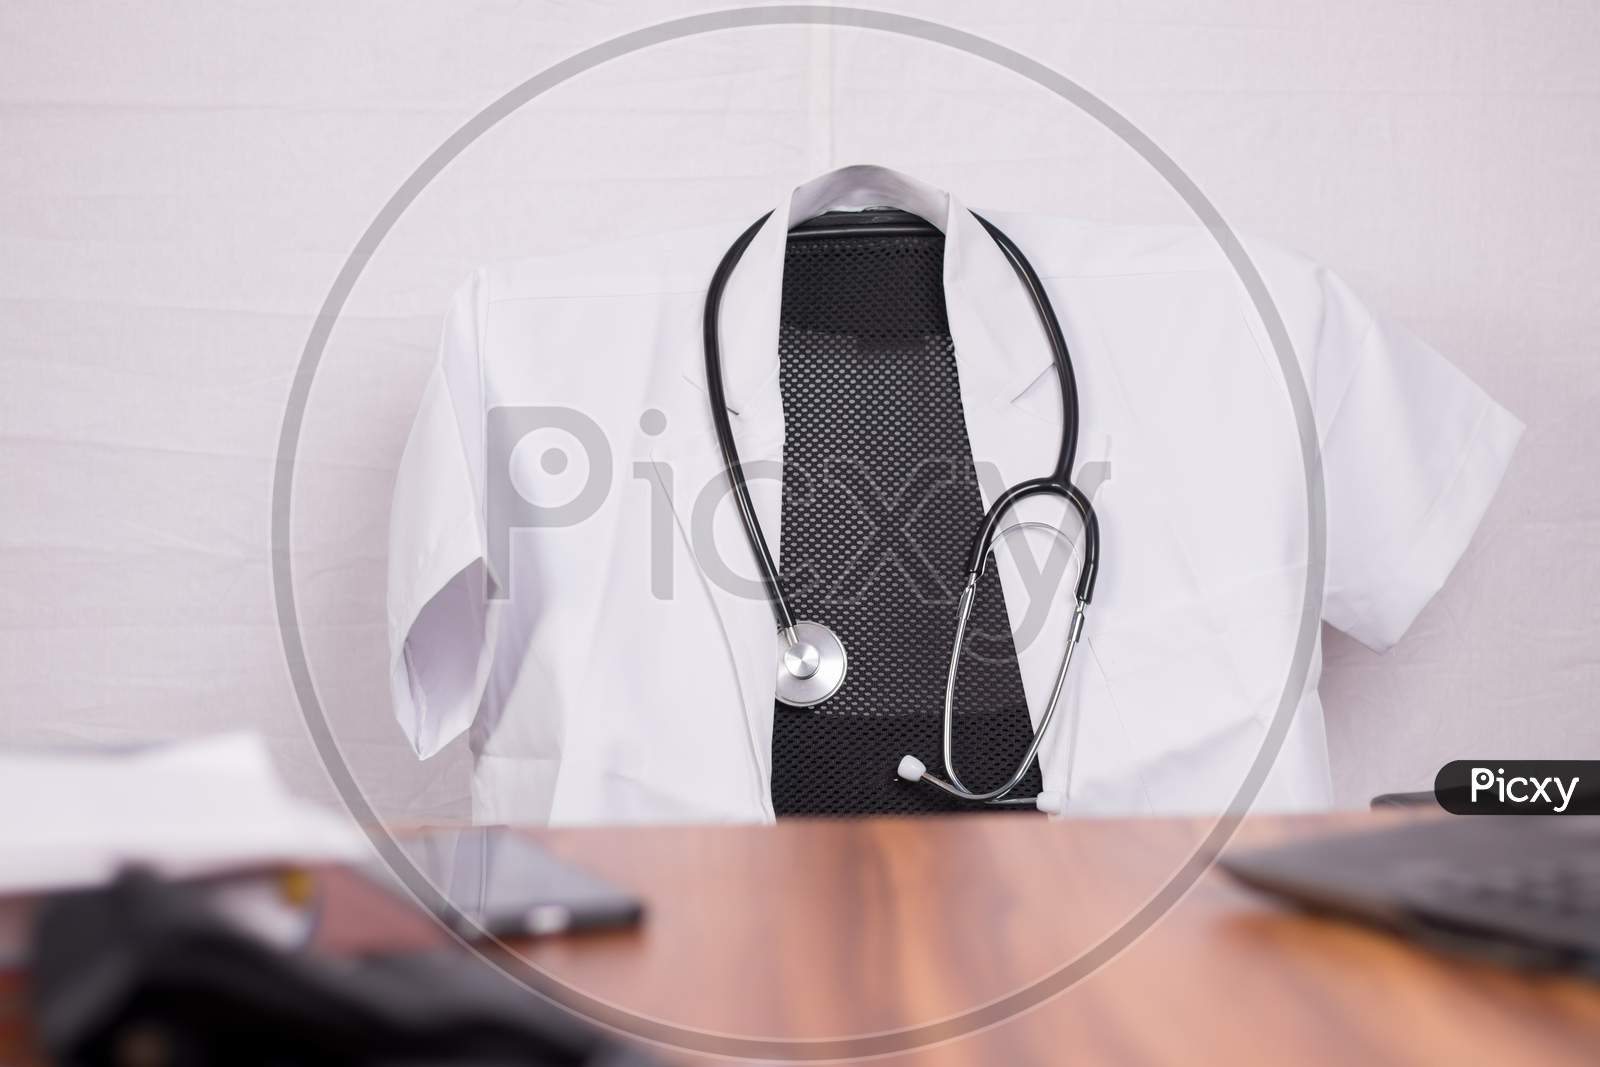 A Chair of a Doctor with Stethoscope